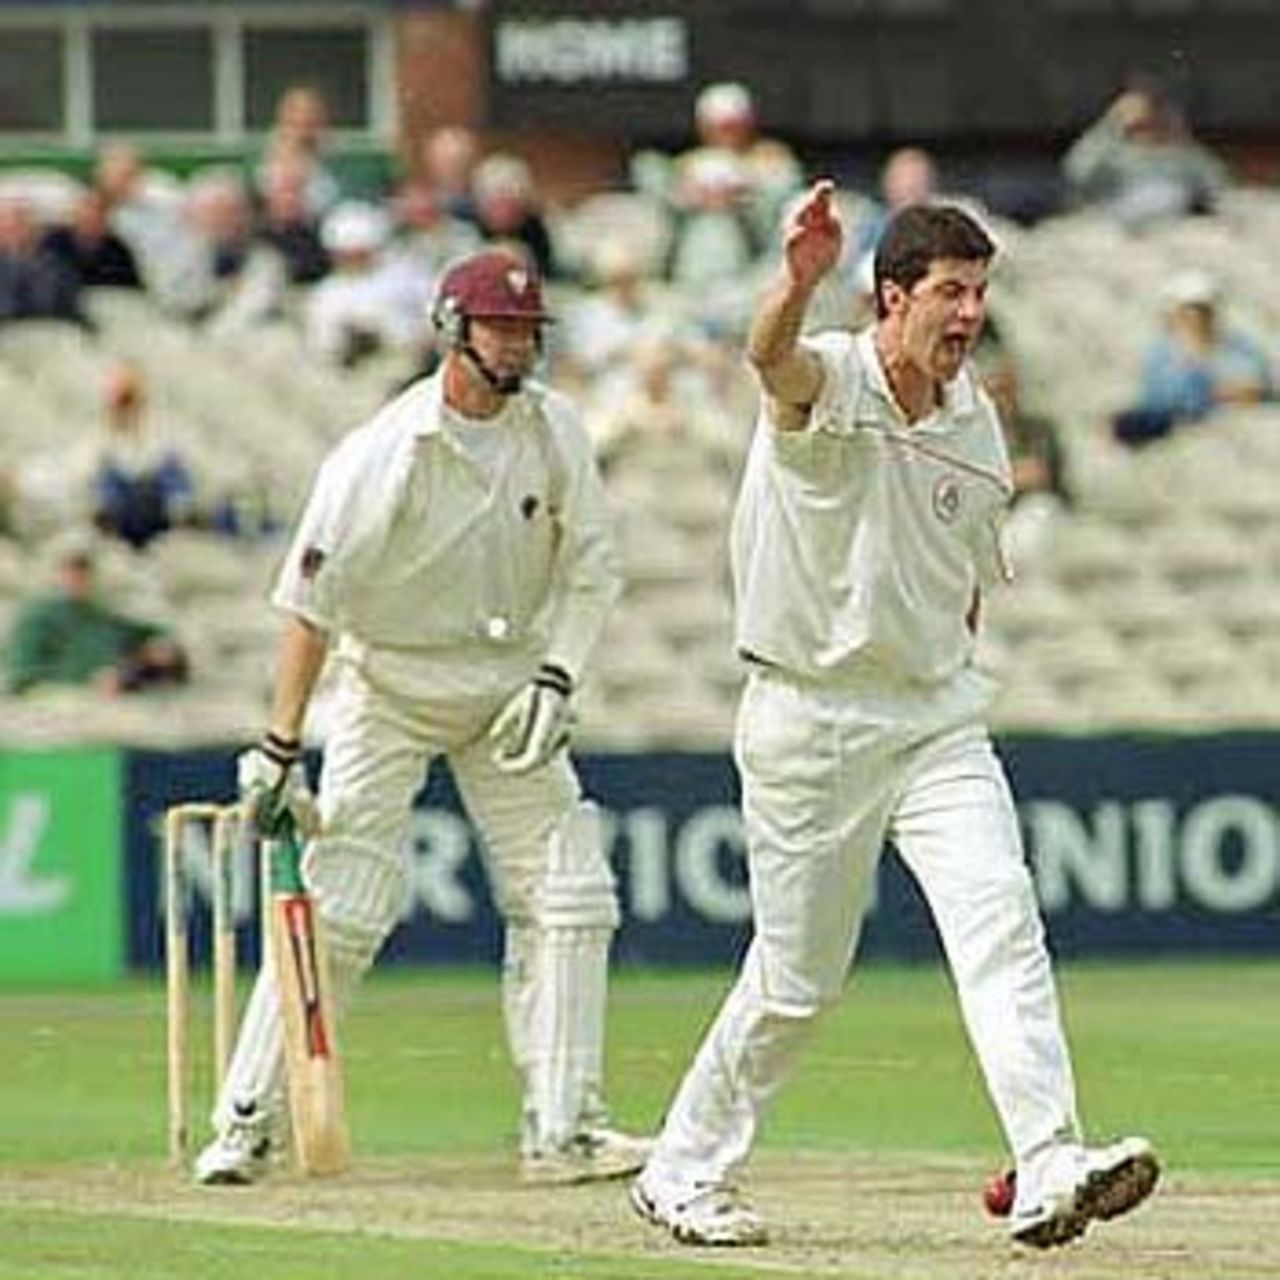 Mike Smethurst traps Rob Turner LBW, PPP healthcare County Championship Division One, 2000, Lancashire v Somerset, Old Trafford, Manchester, 08-10 September 2000 (Day 1).